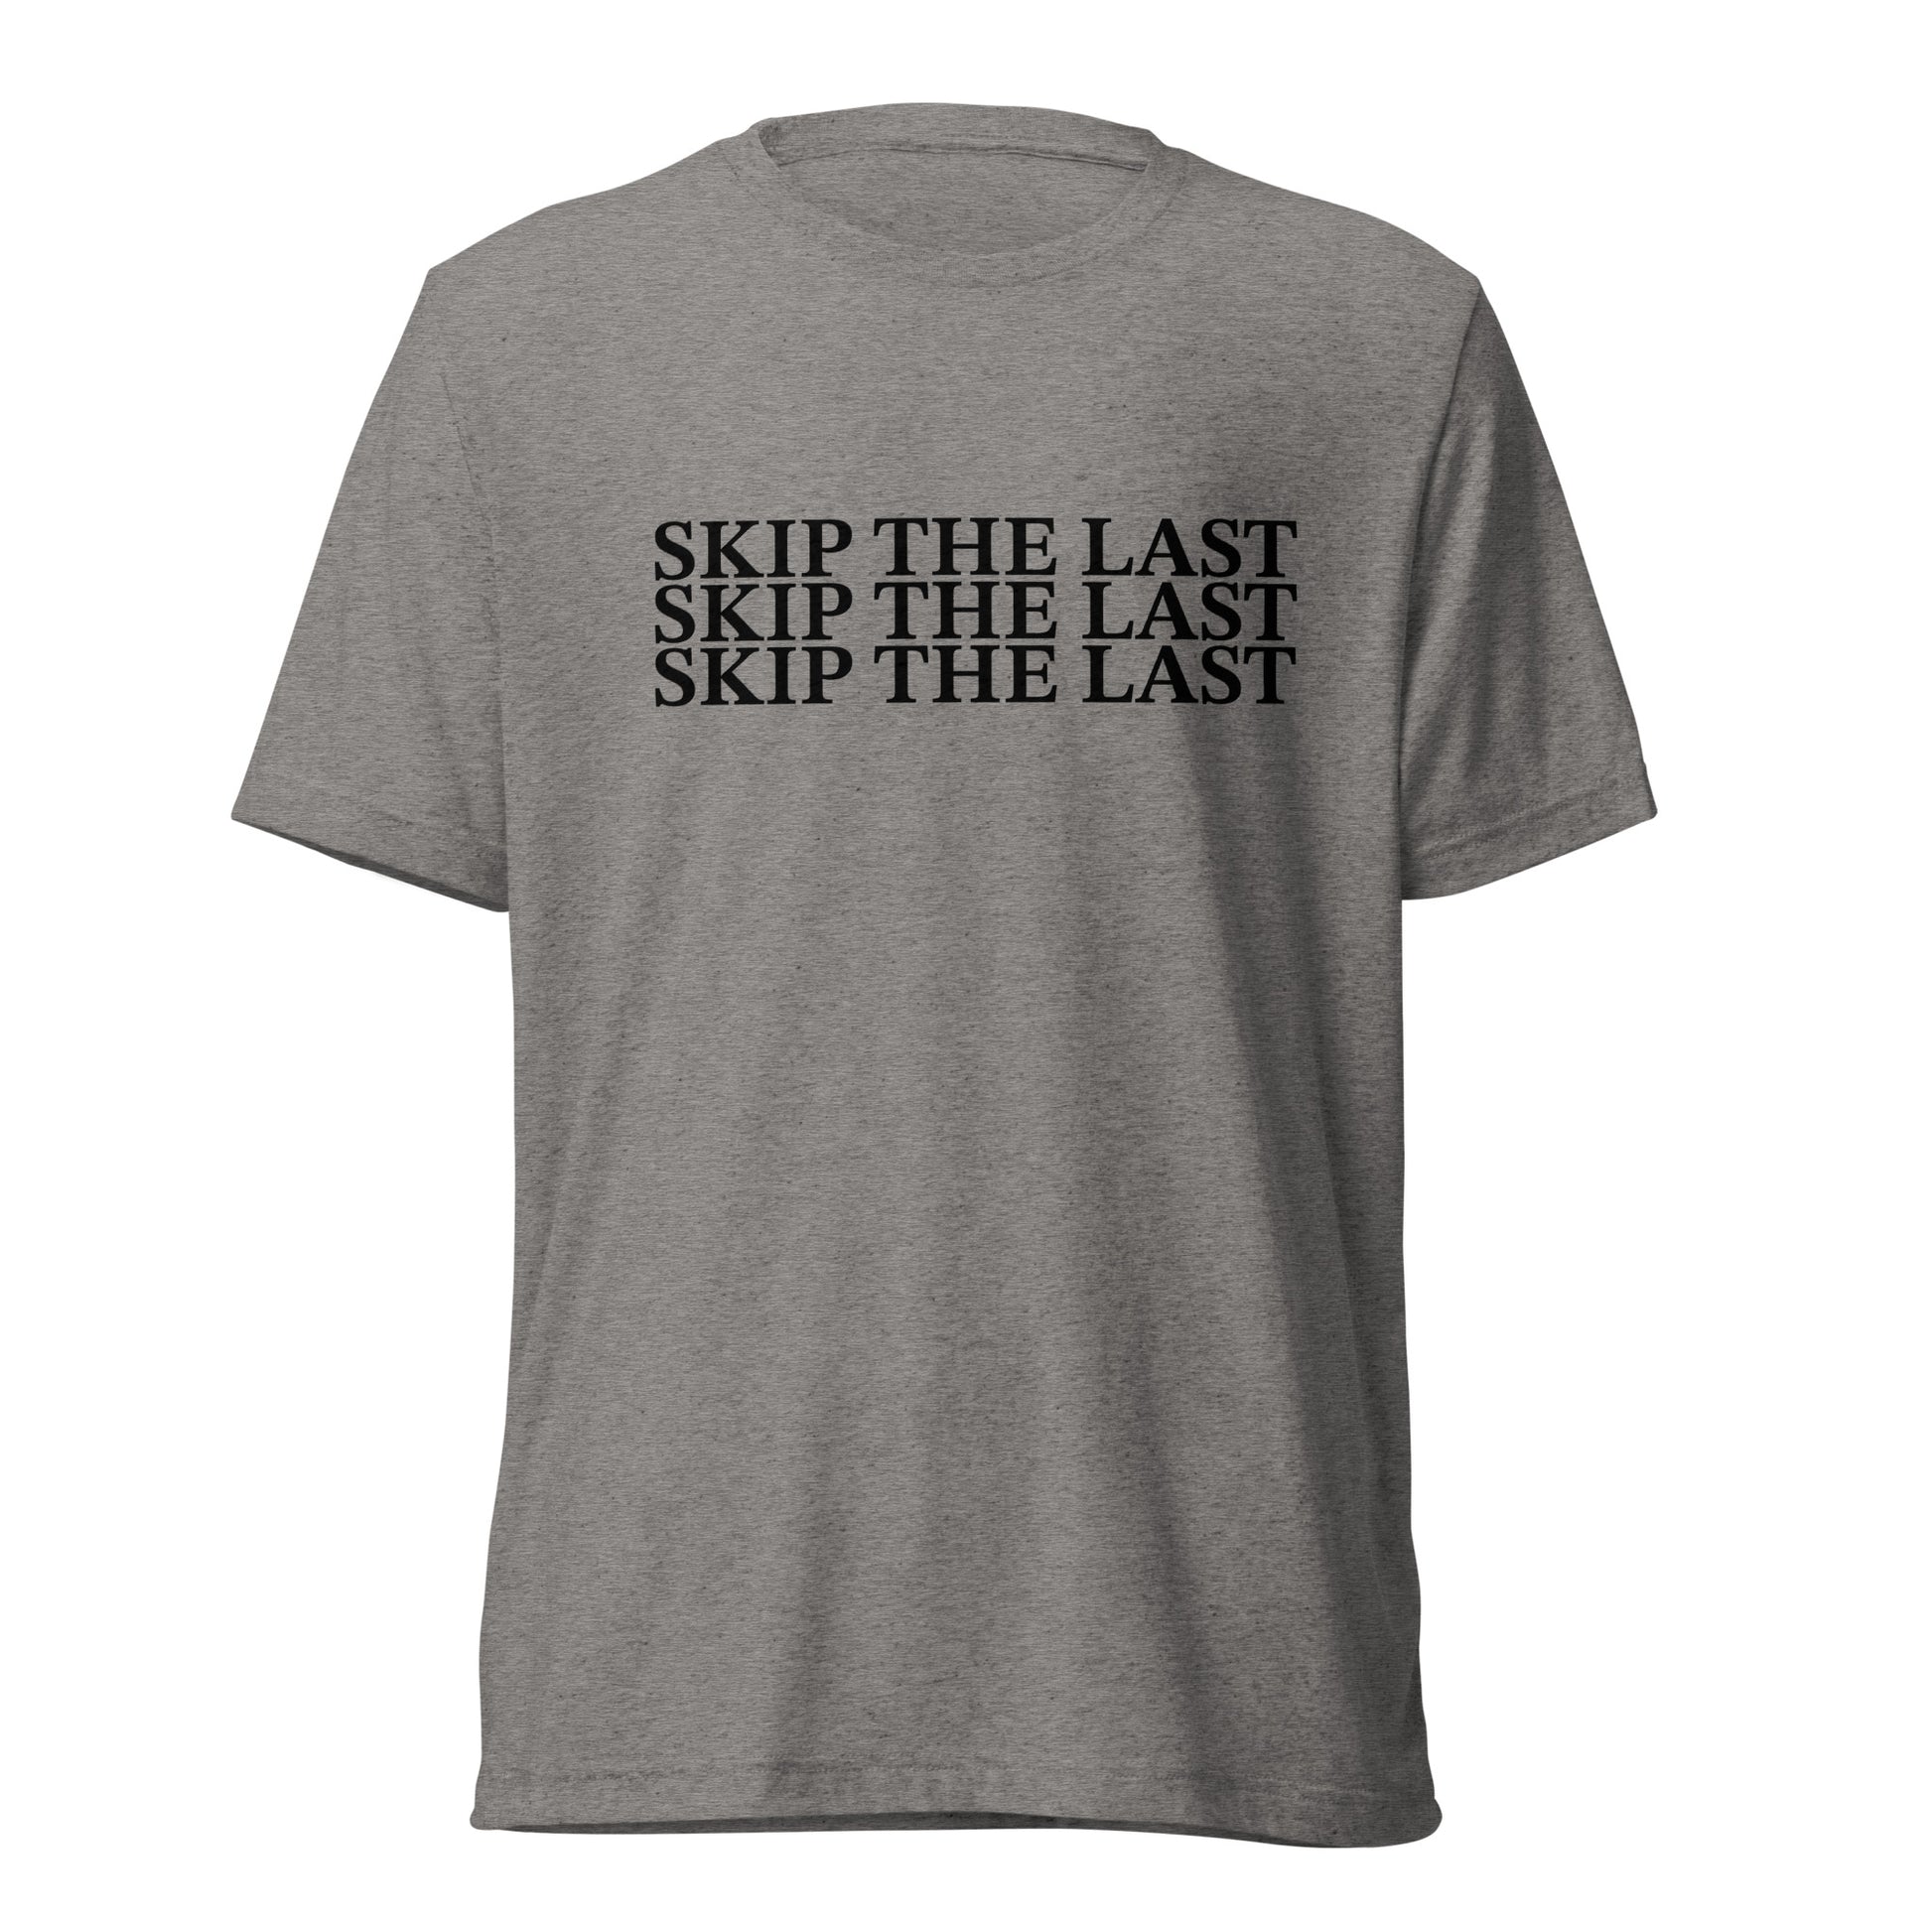 Two More Skip The Last "Skip the Last x3" grey unisex tri-blend t-shirt. Front view